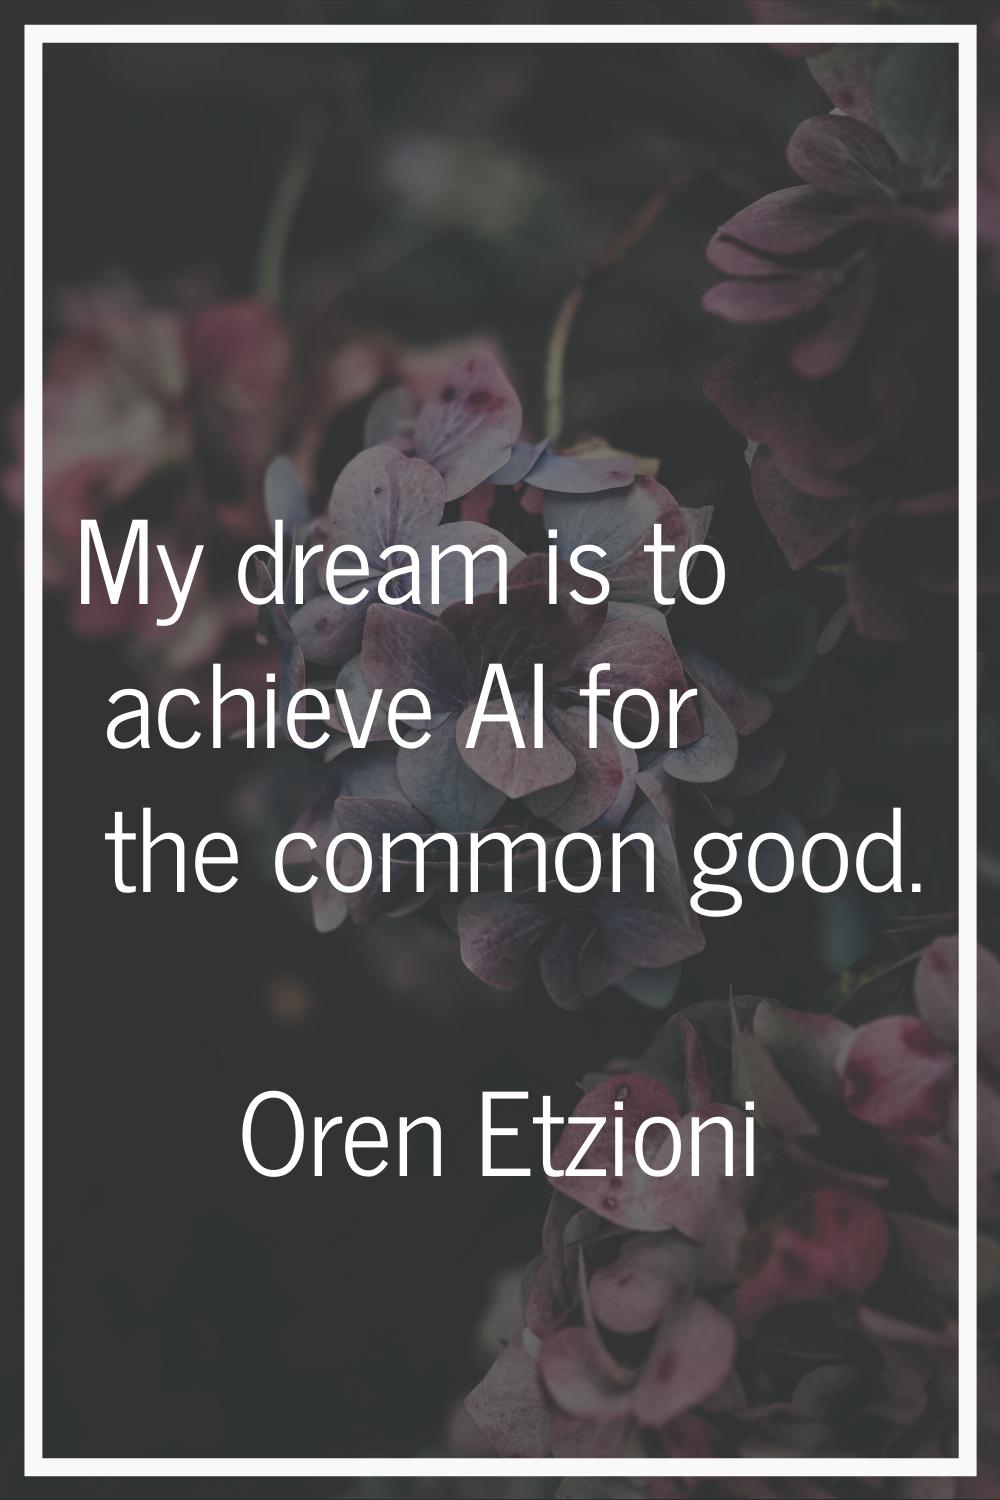 My dream is to achieve AI for the common good.